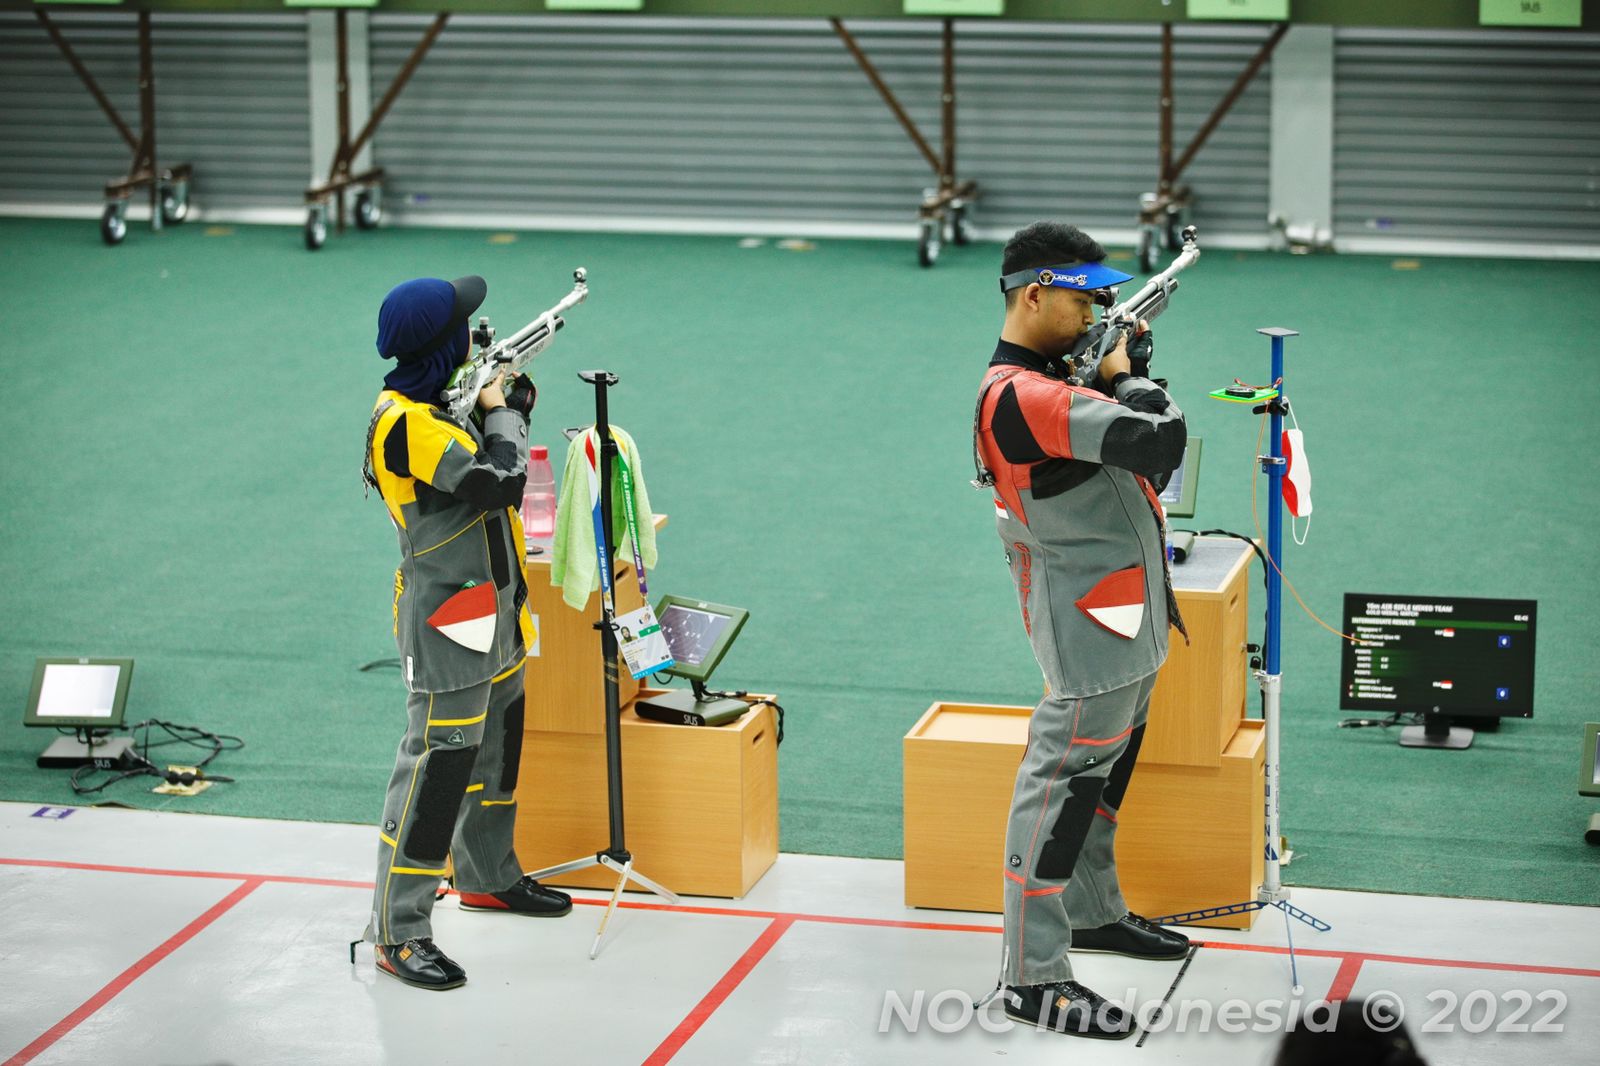 Fathur/Citra on target, Indonesia wins another gold medal - Indonesia Olympic Commitee